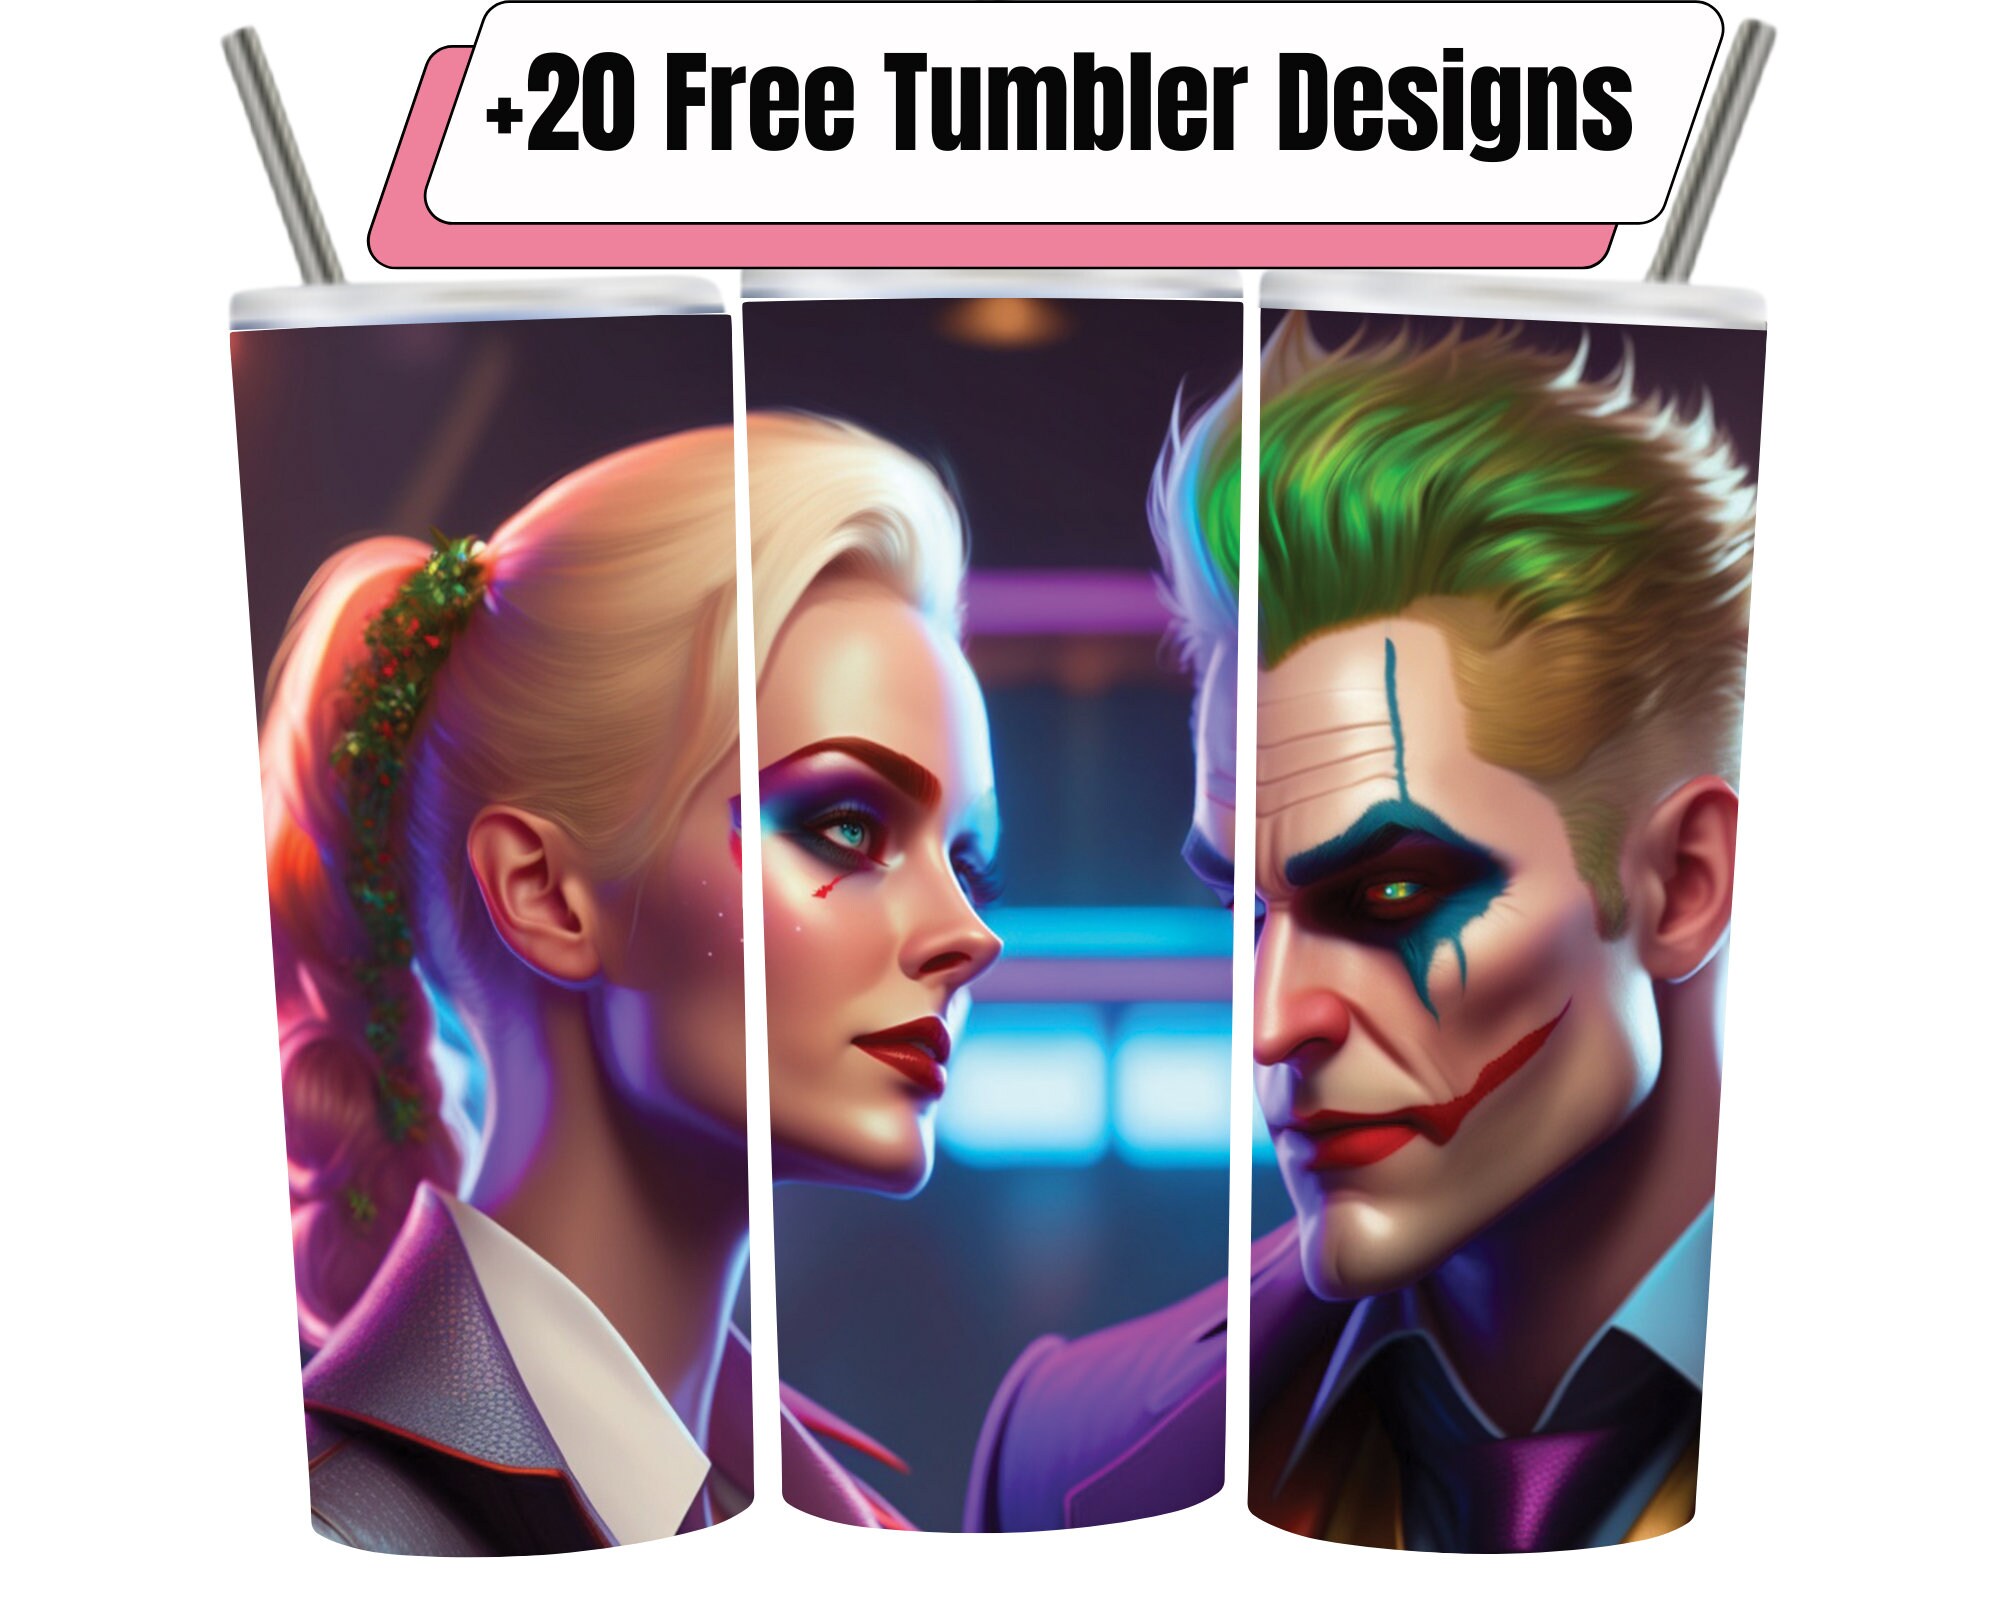 Poster Suicide Squad - Joker and Harley Quinn | Wall Art, Gifts &  Merchandise 